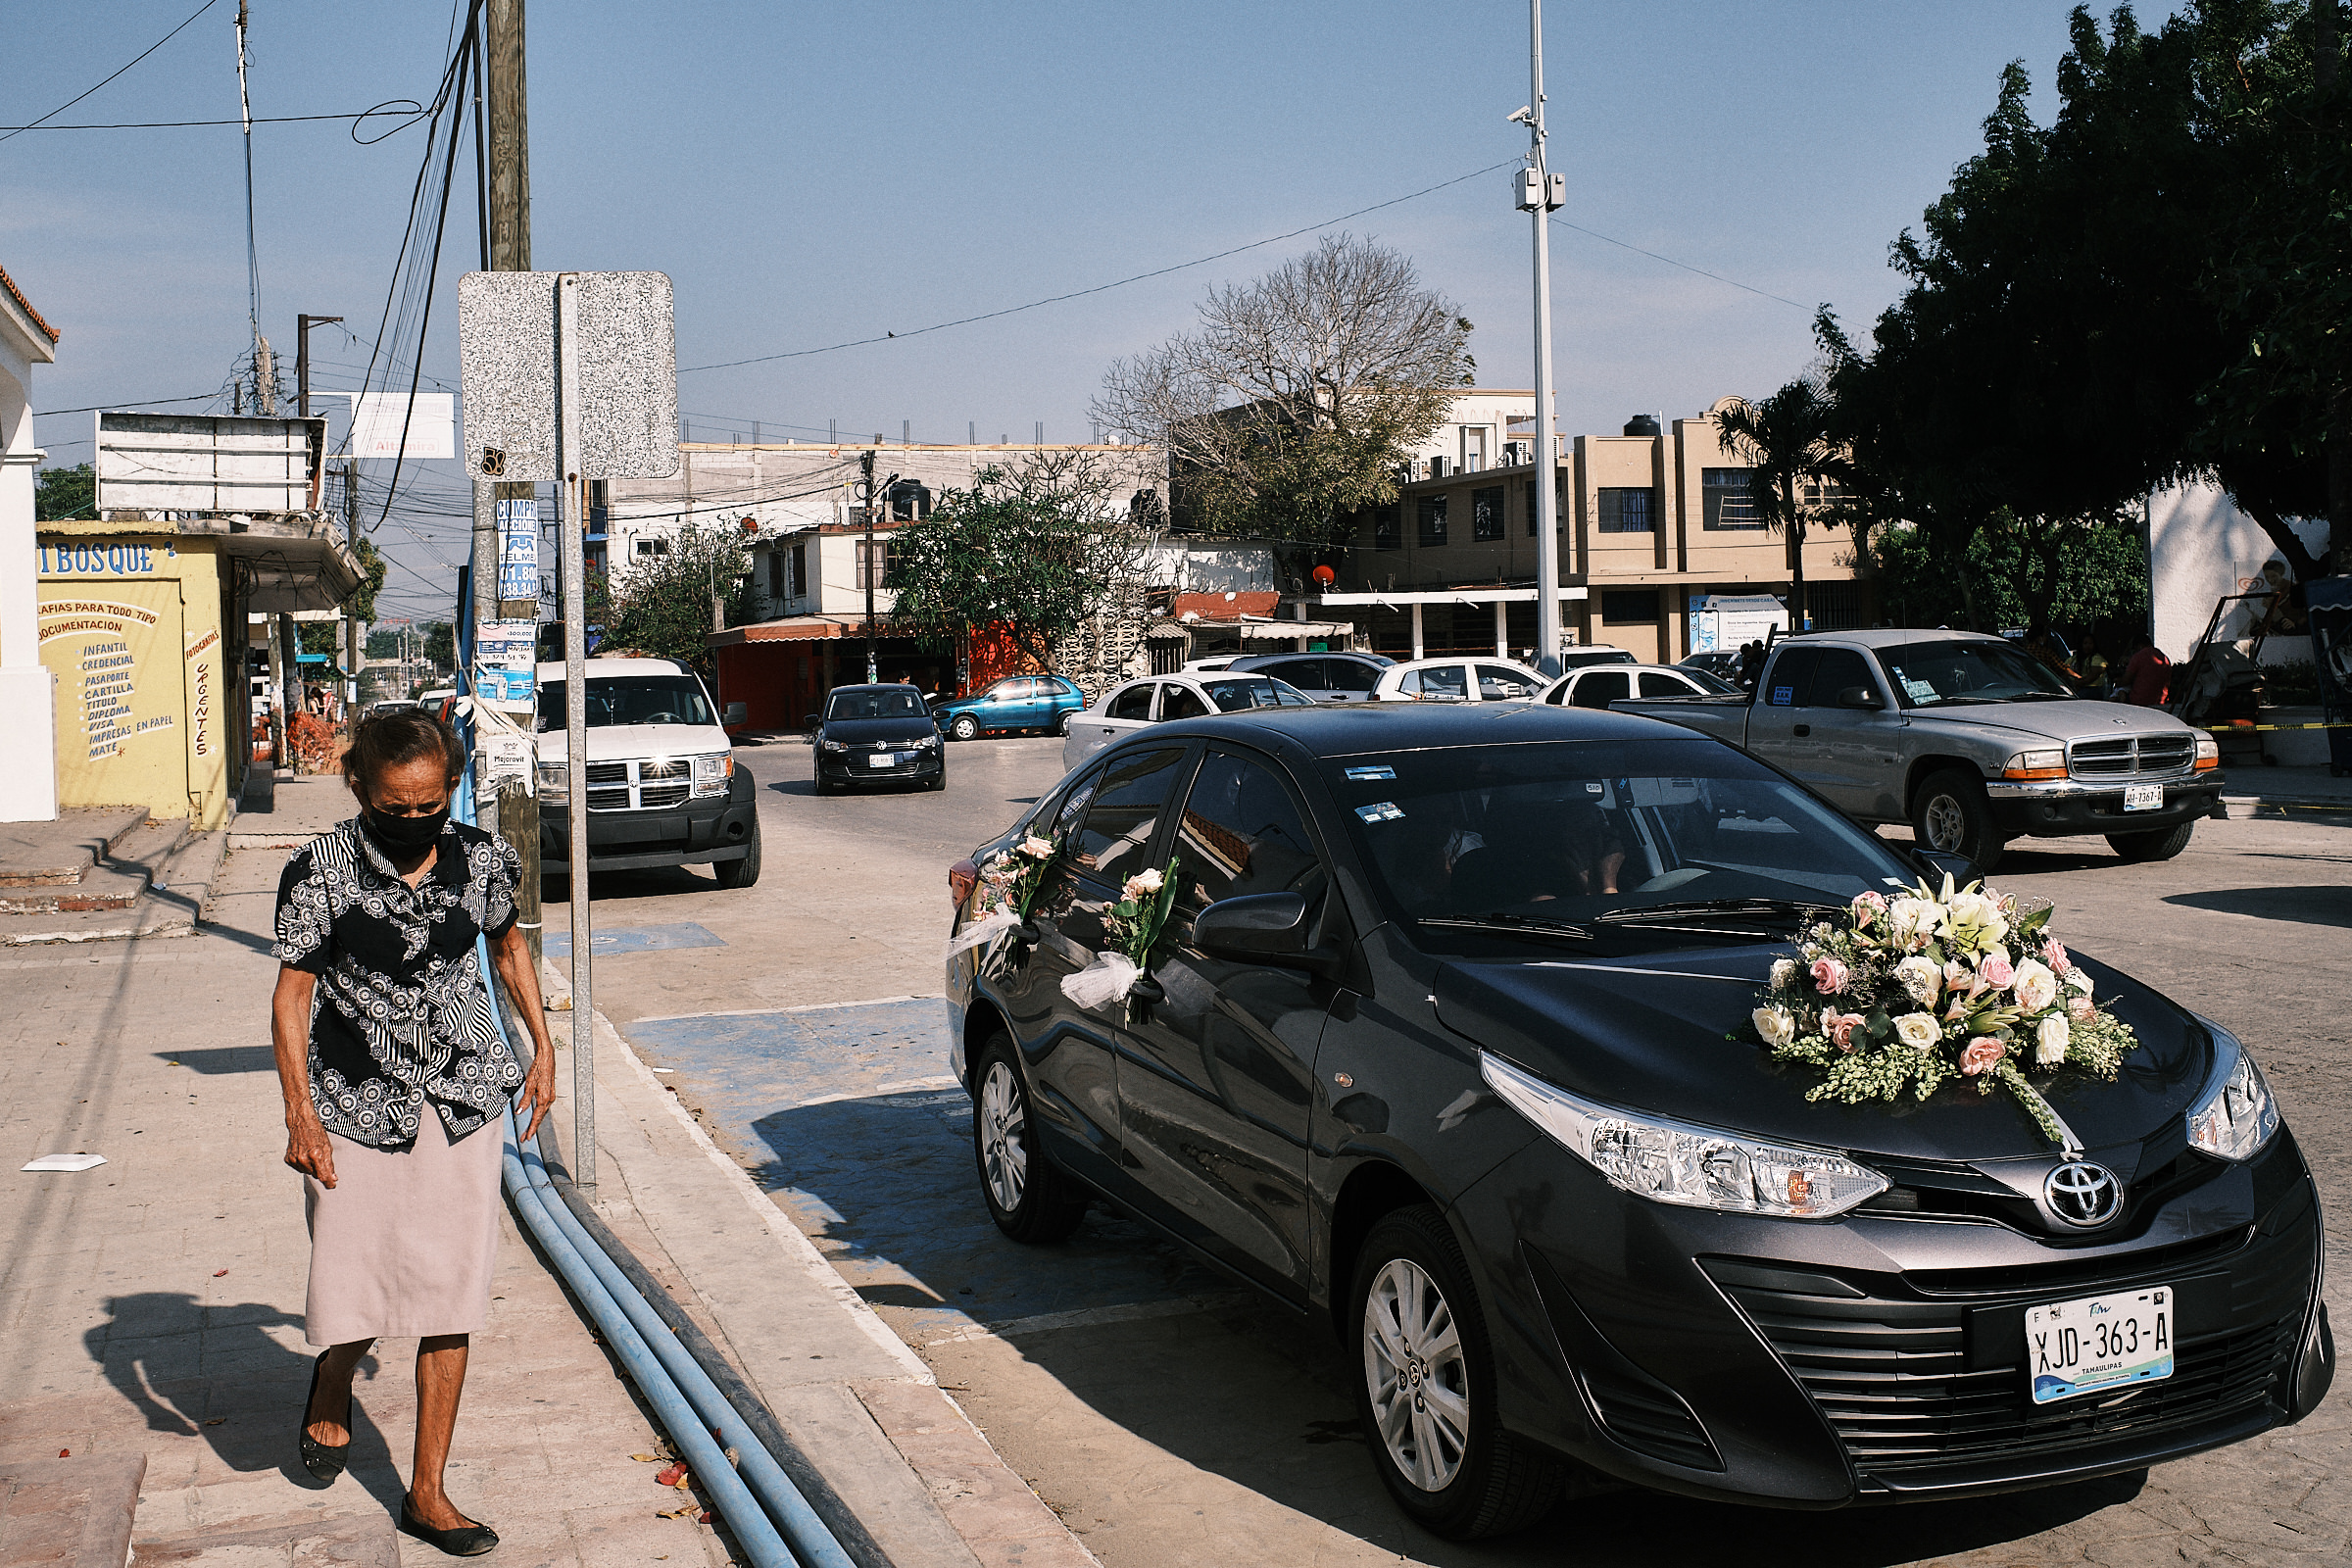 The Car With The Bride In The Streets Of Mexico Before Ceremony